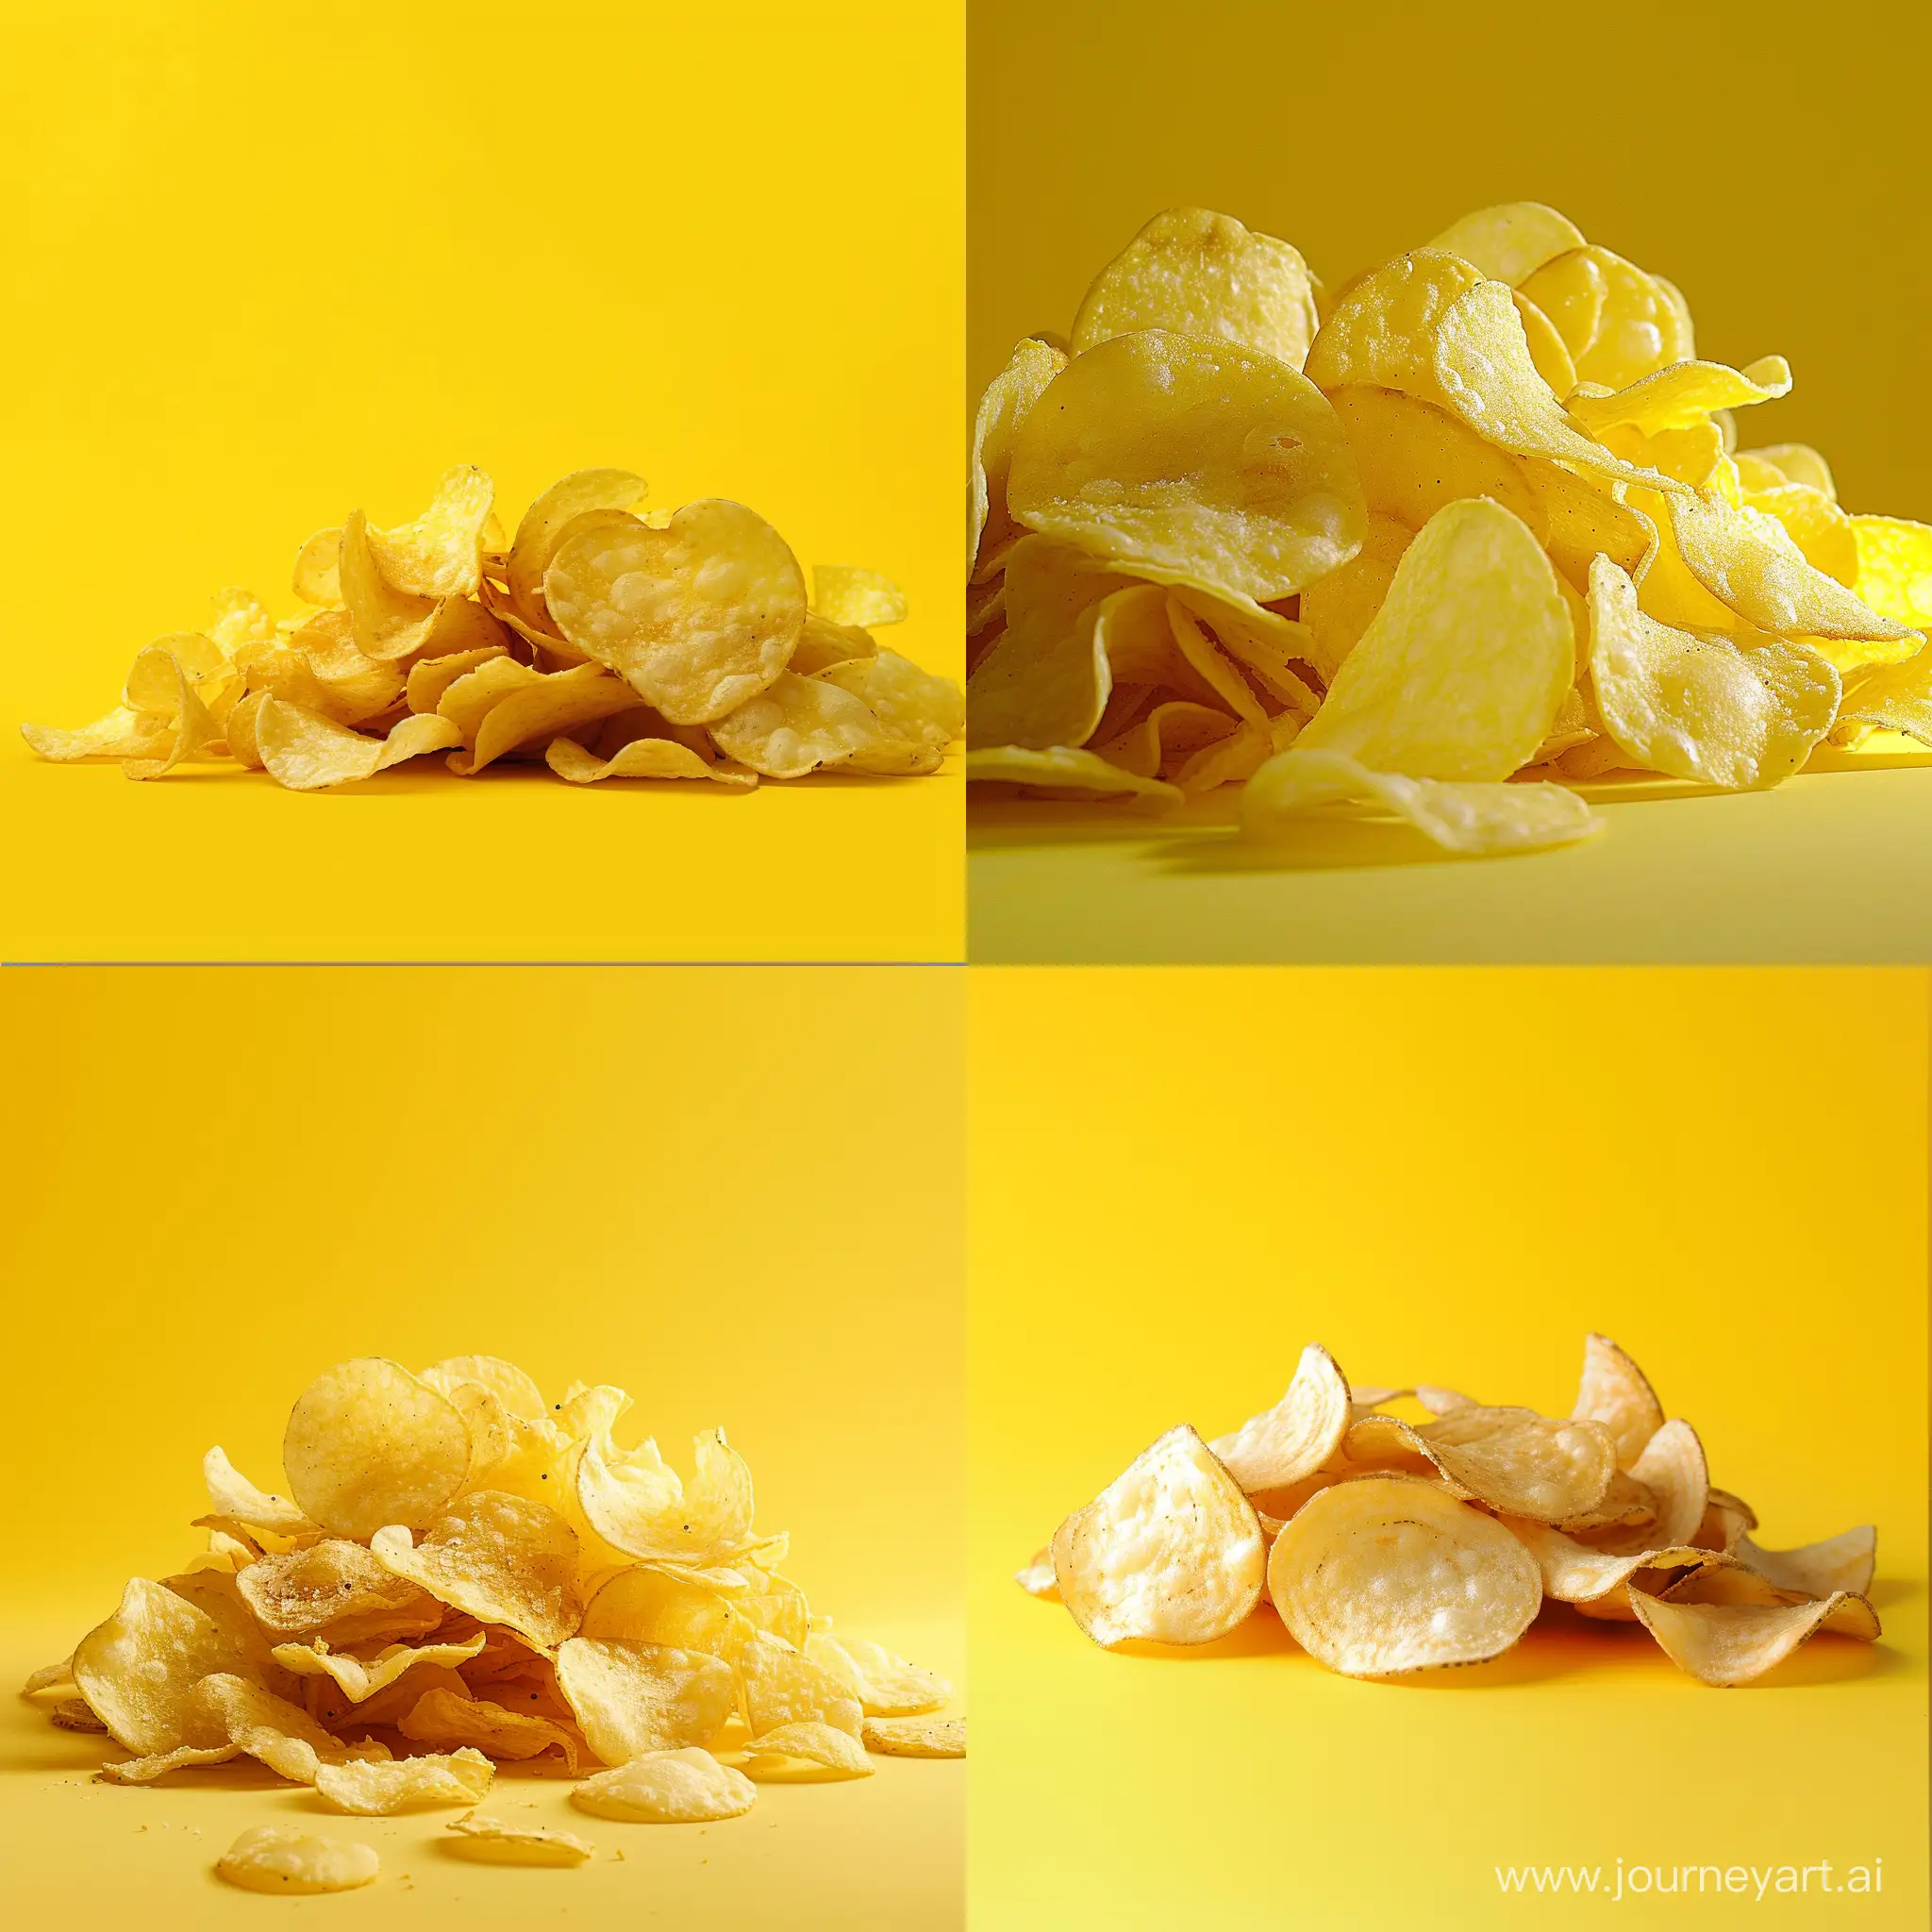 Photorealistic-Pringles-Chips-on-Yellow-Background-Studio-Shot-with-Canon-DSLR